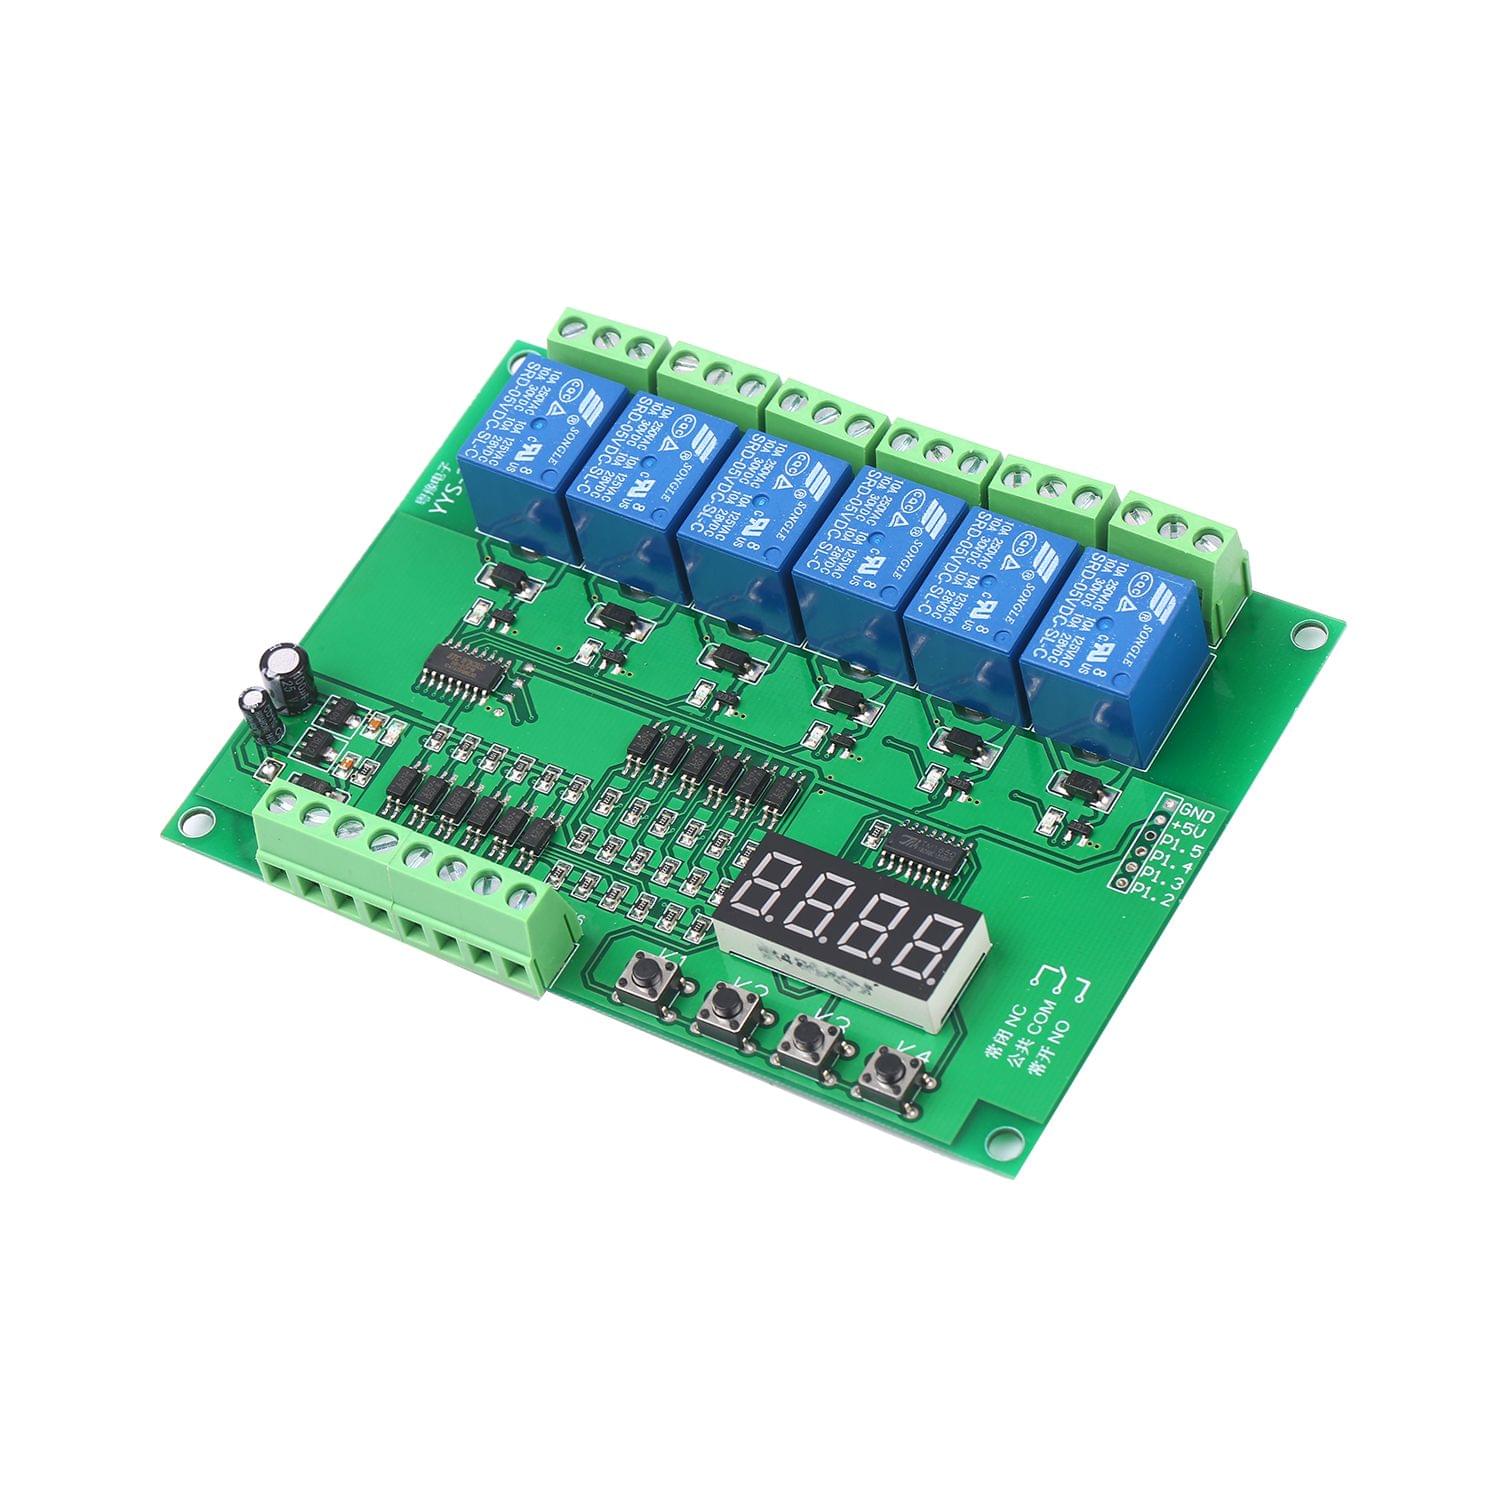 DC 5V Programmable 6-Channel Relay Module Timing Cycle Time - DC 5V